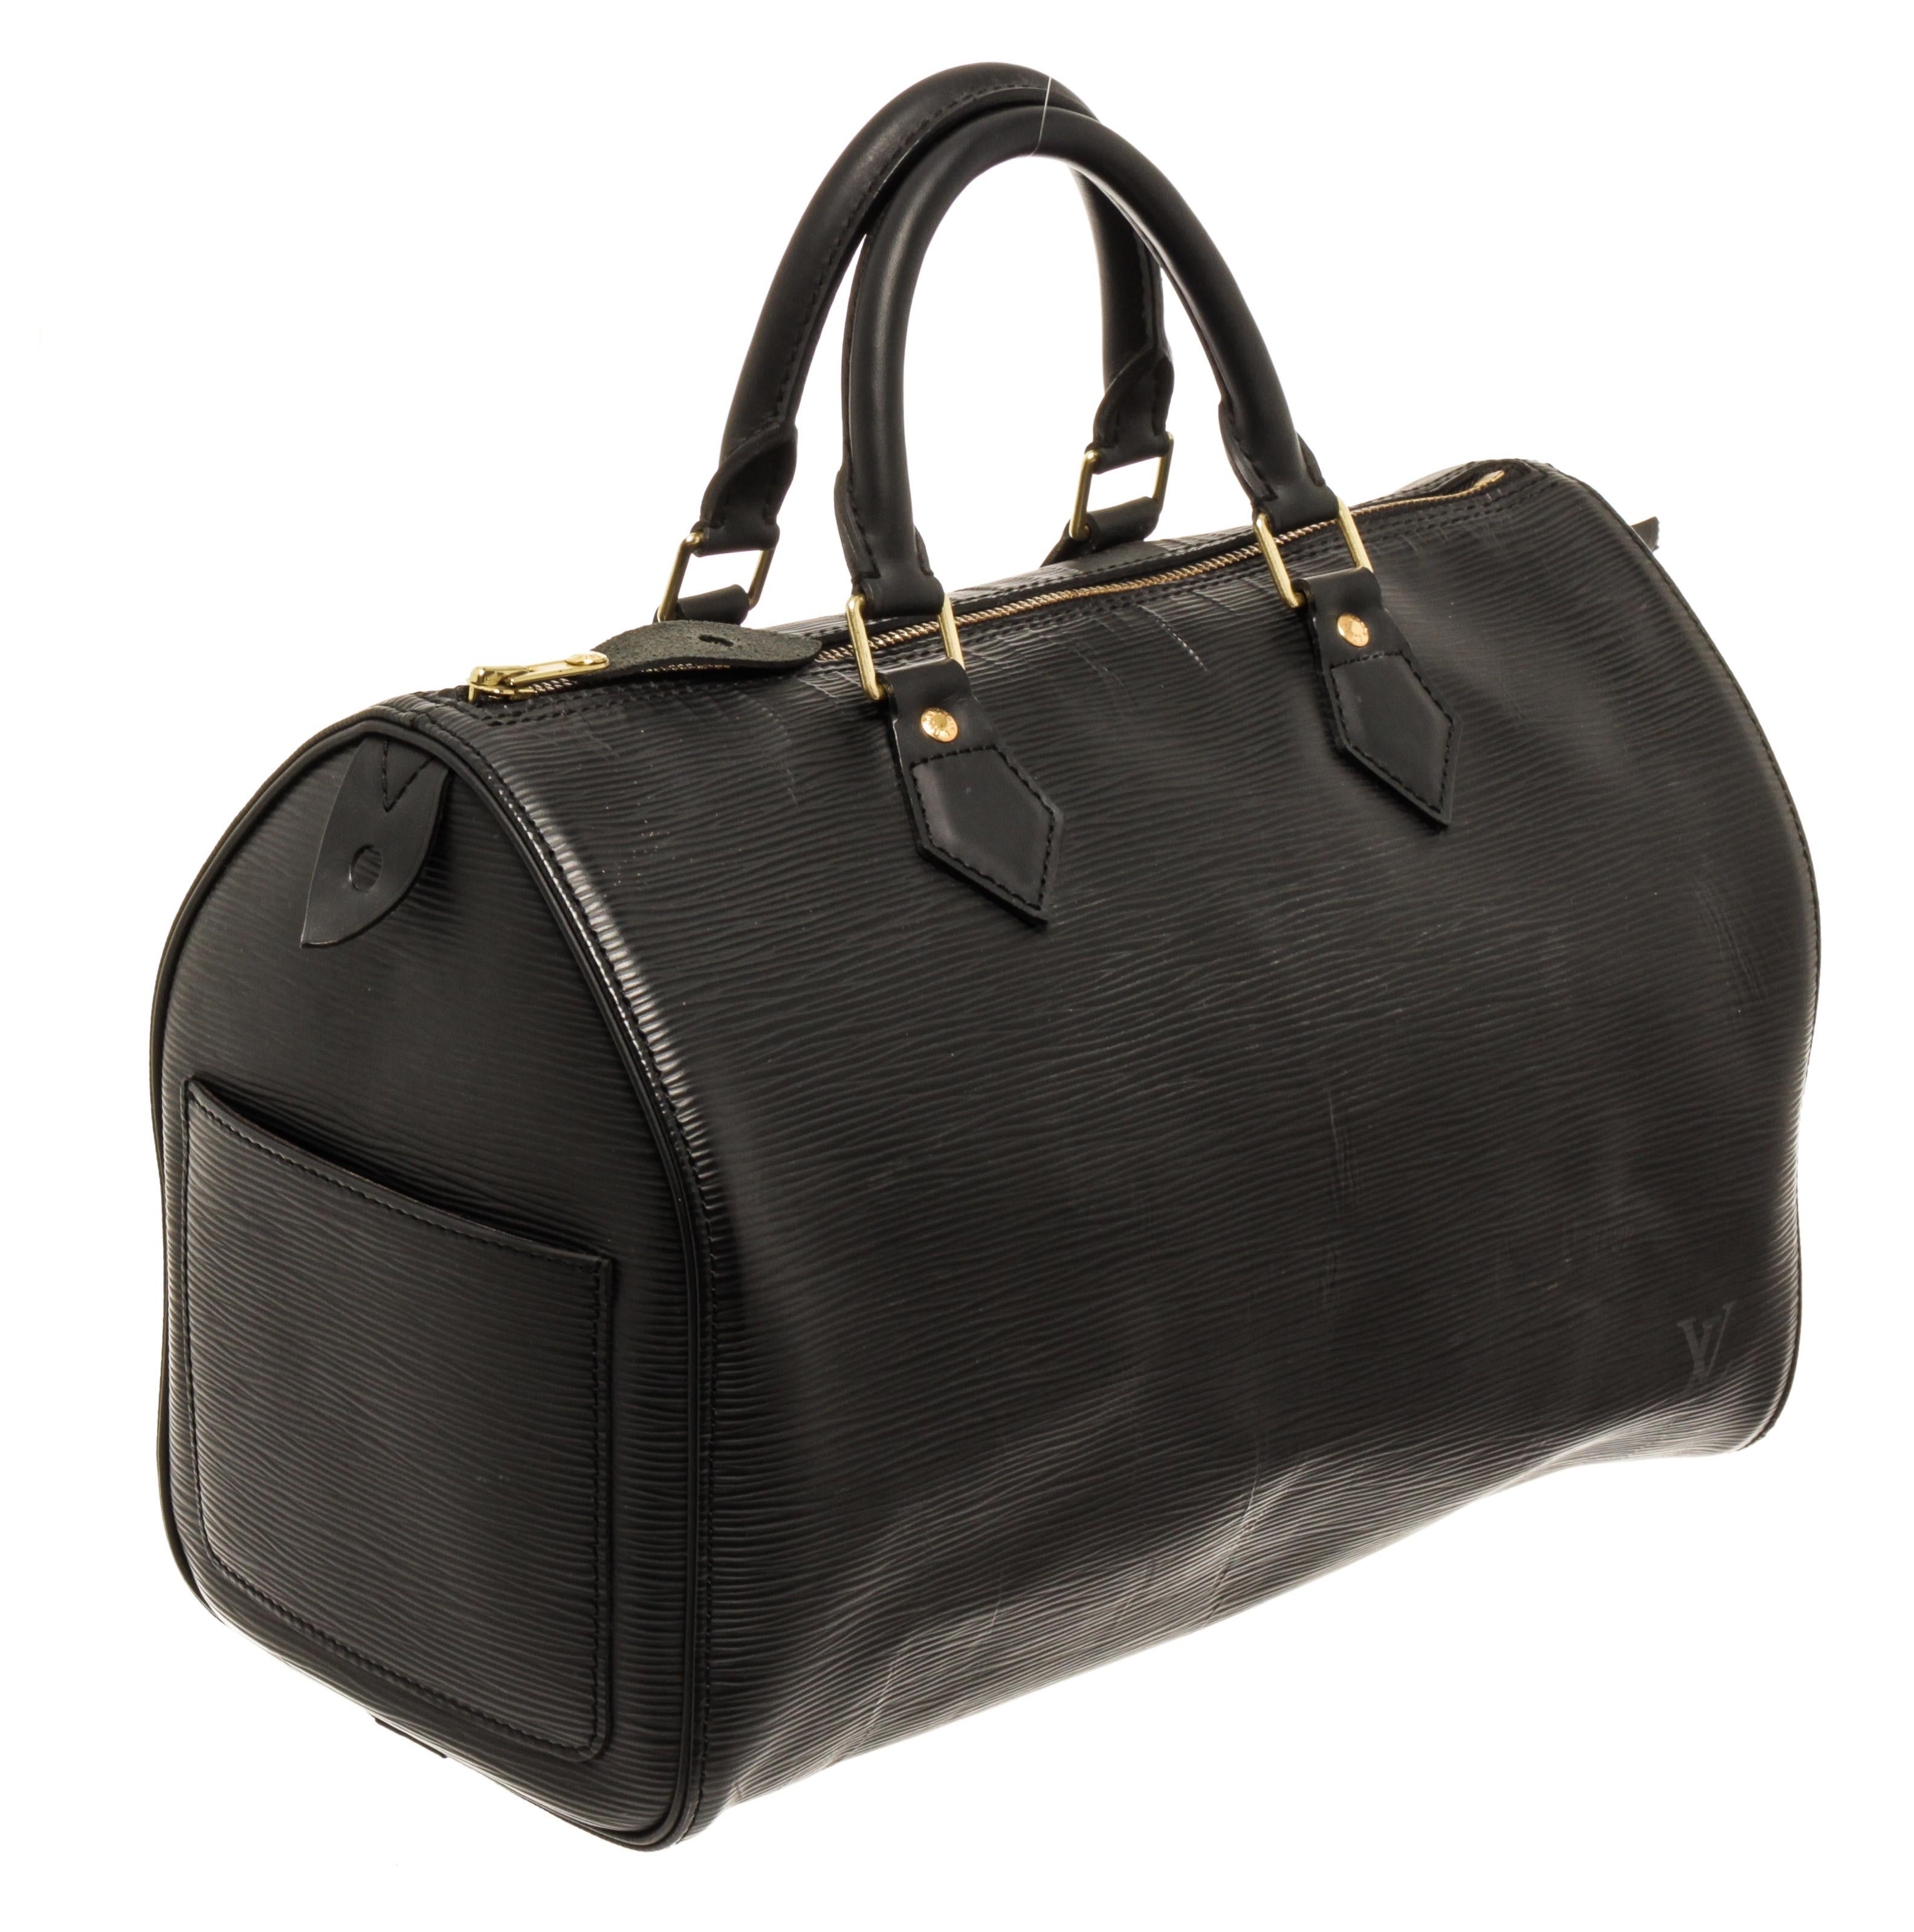 Louis Vuitton Black Epi Leather Speedy 30cm Satchel Bag with material epi leather, gold-tone hardware, trim tan vachetta leather, exterior patch pocket at the side, black canvas lining, dual rolled leather top handles and zipper closure.

76488MSC.